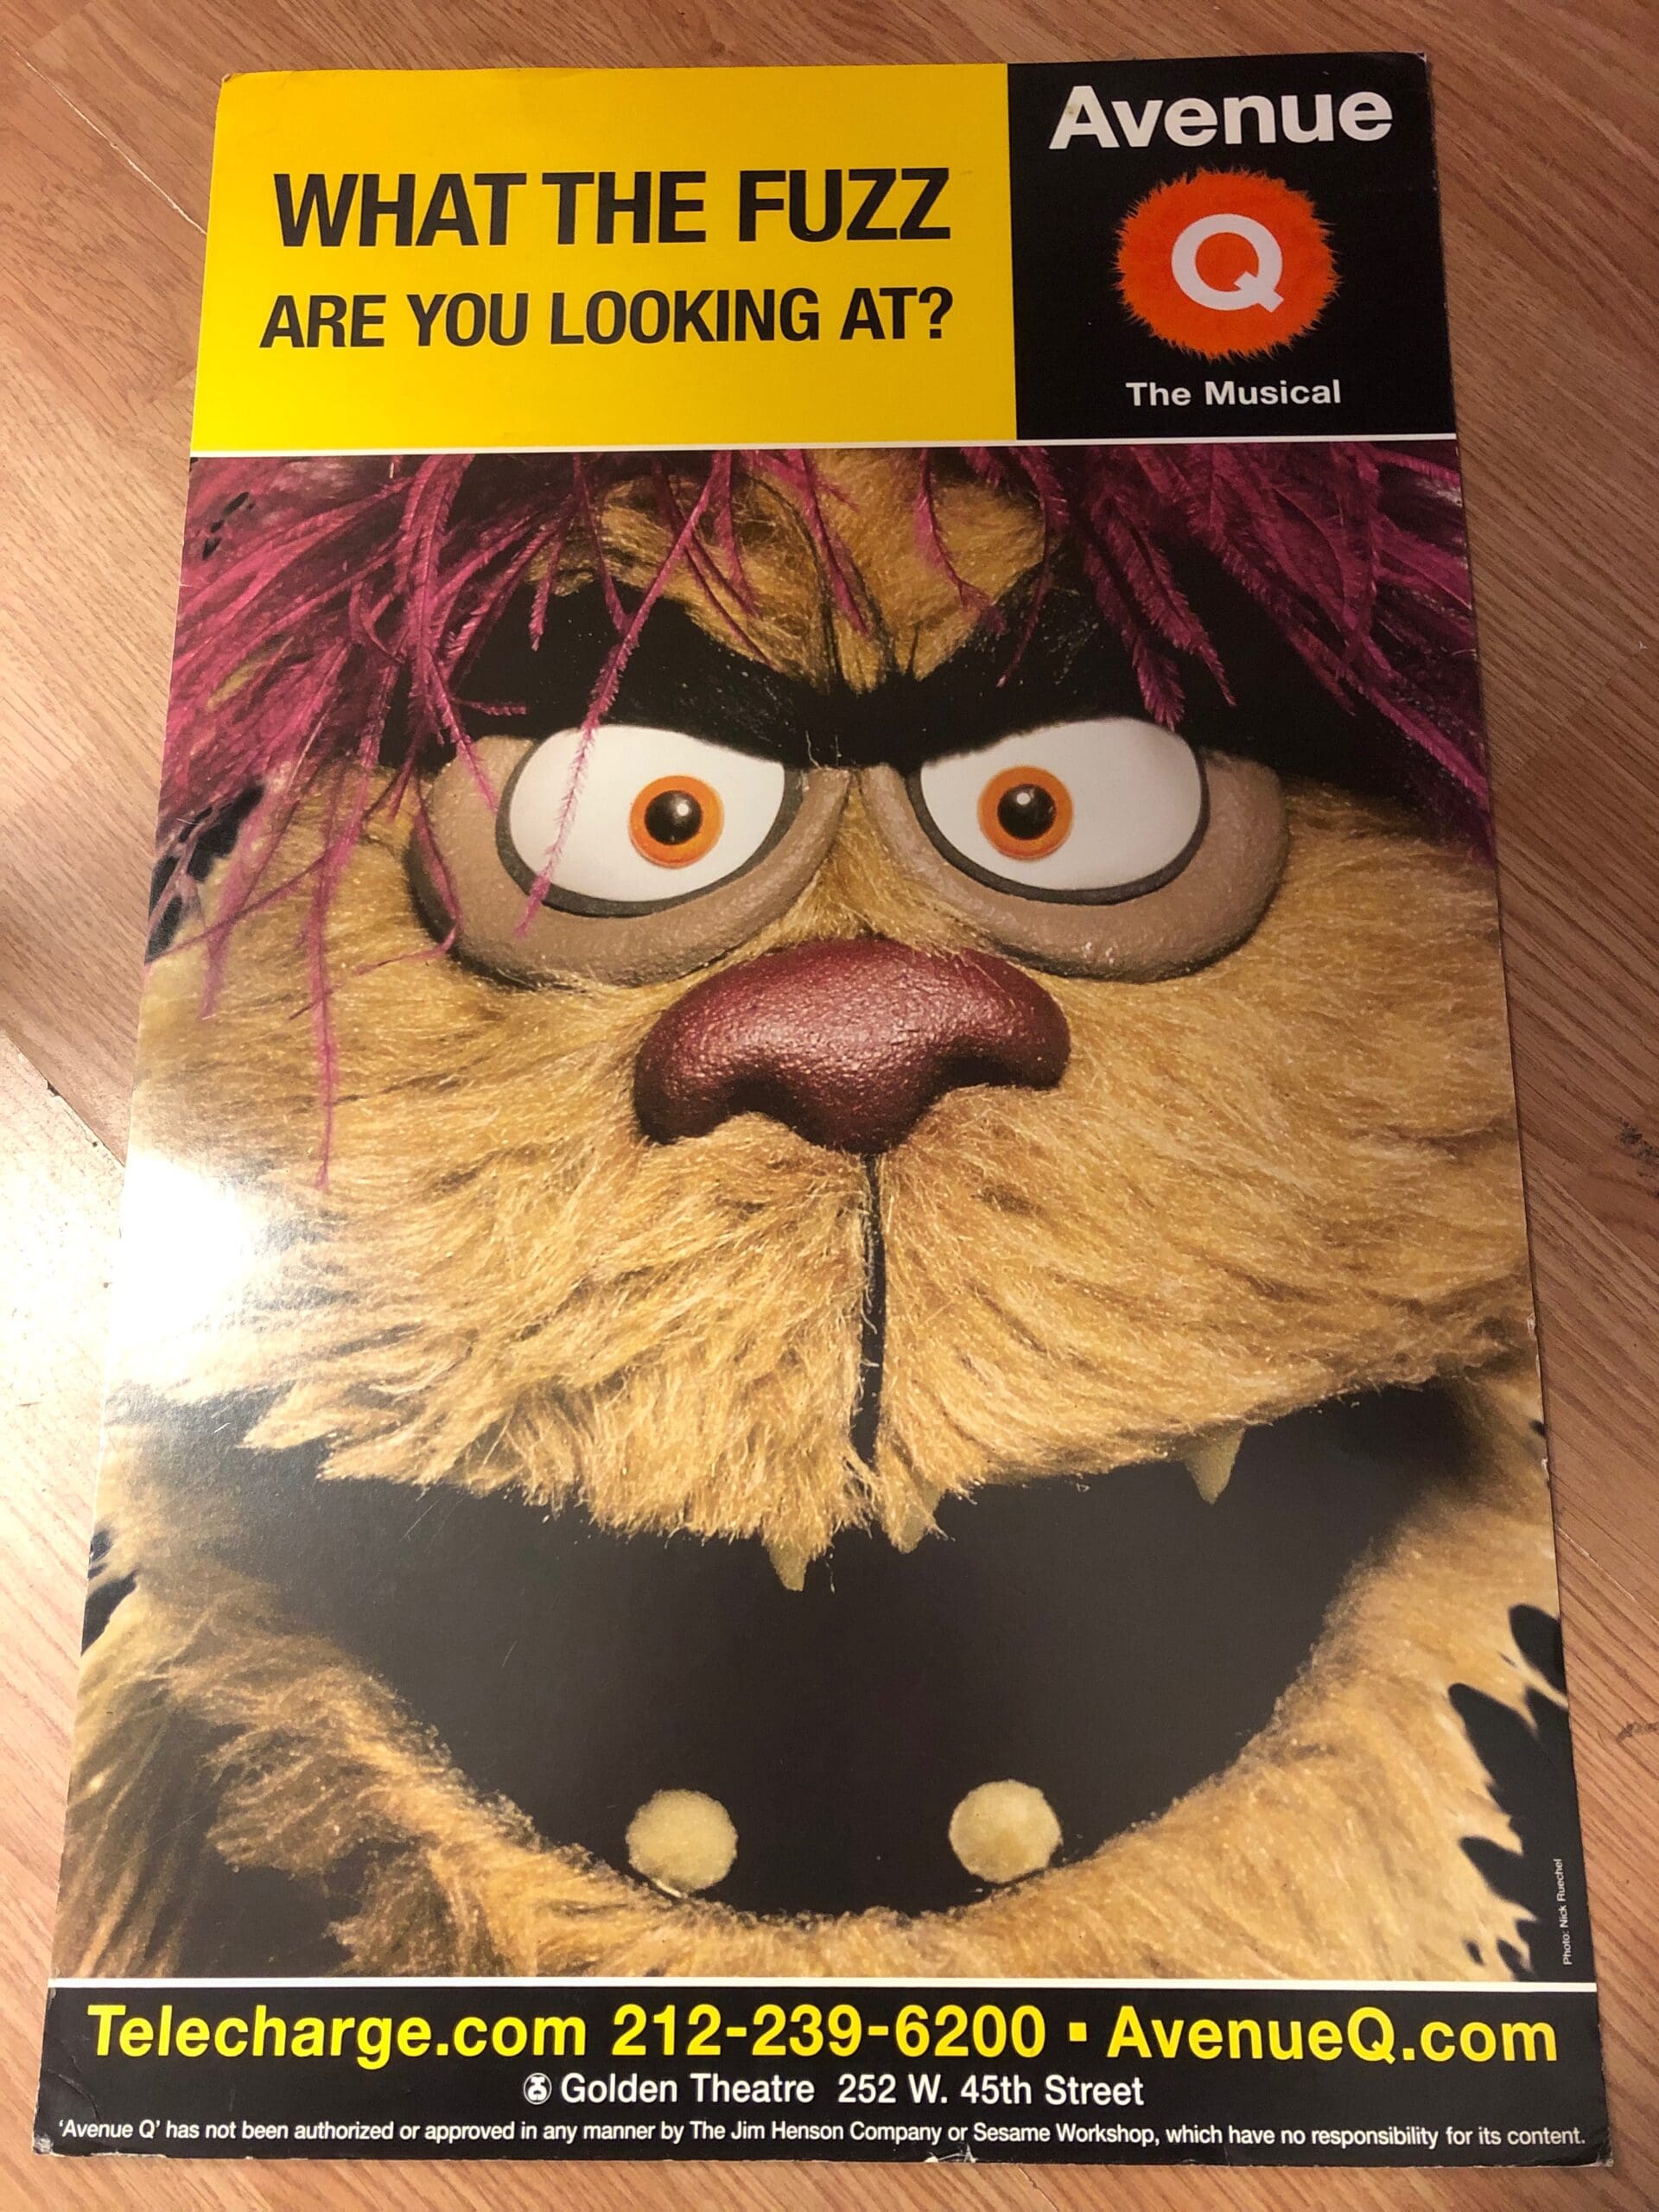 Featured image for “Enter our competition for a chance to win an Avenue Q Broadway poster”